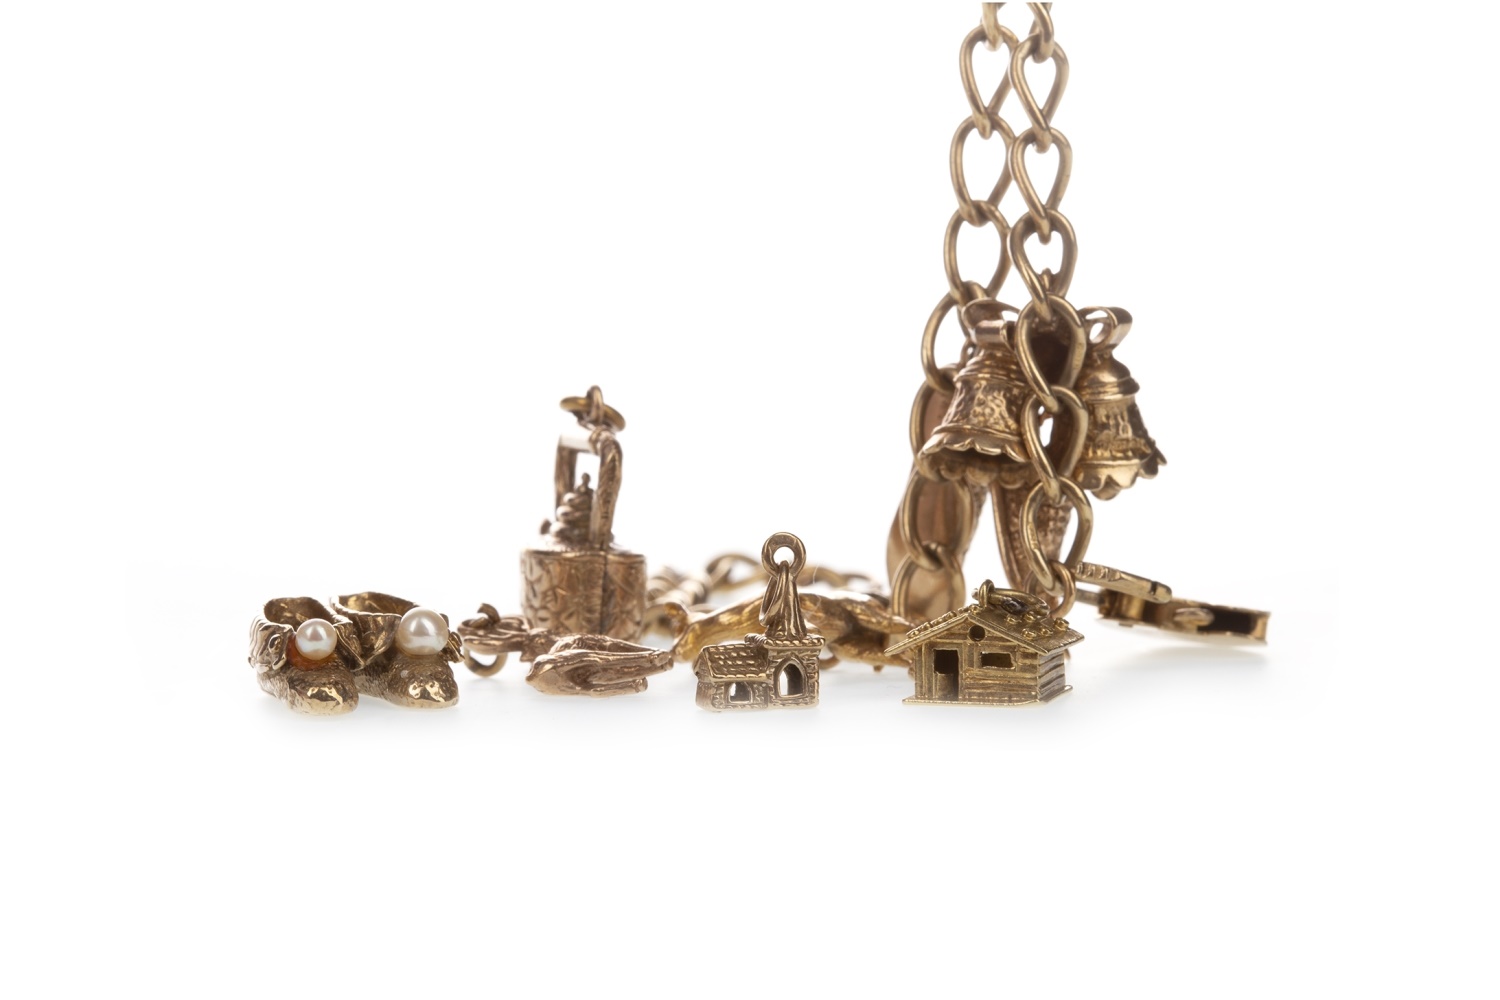 A GOLD CHARM BRACELET ALONG WITH LOOSE CHARMS